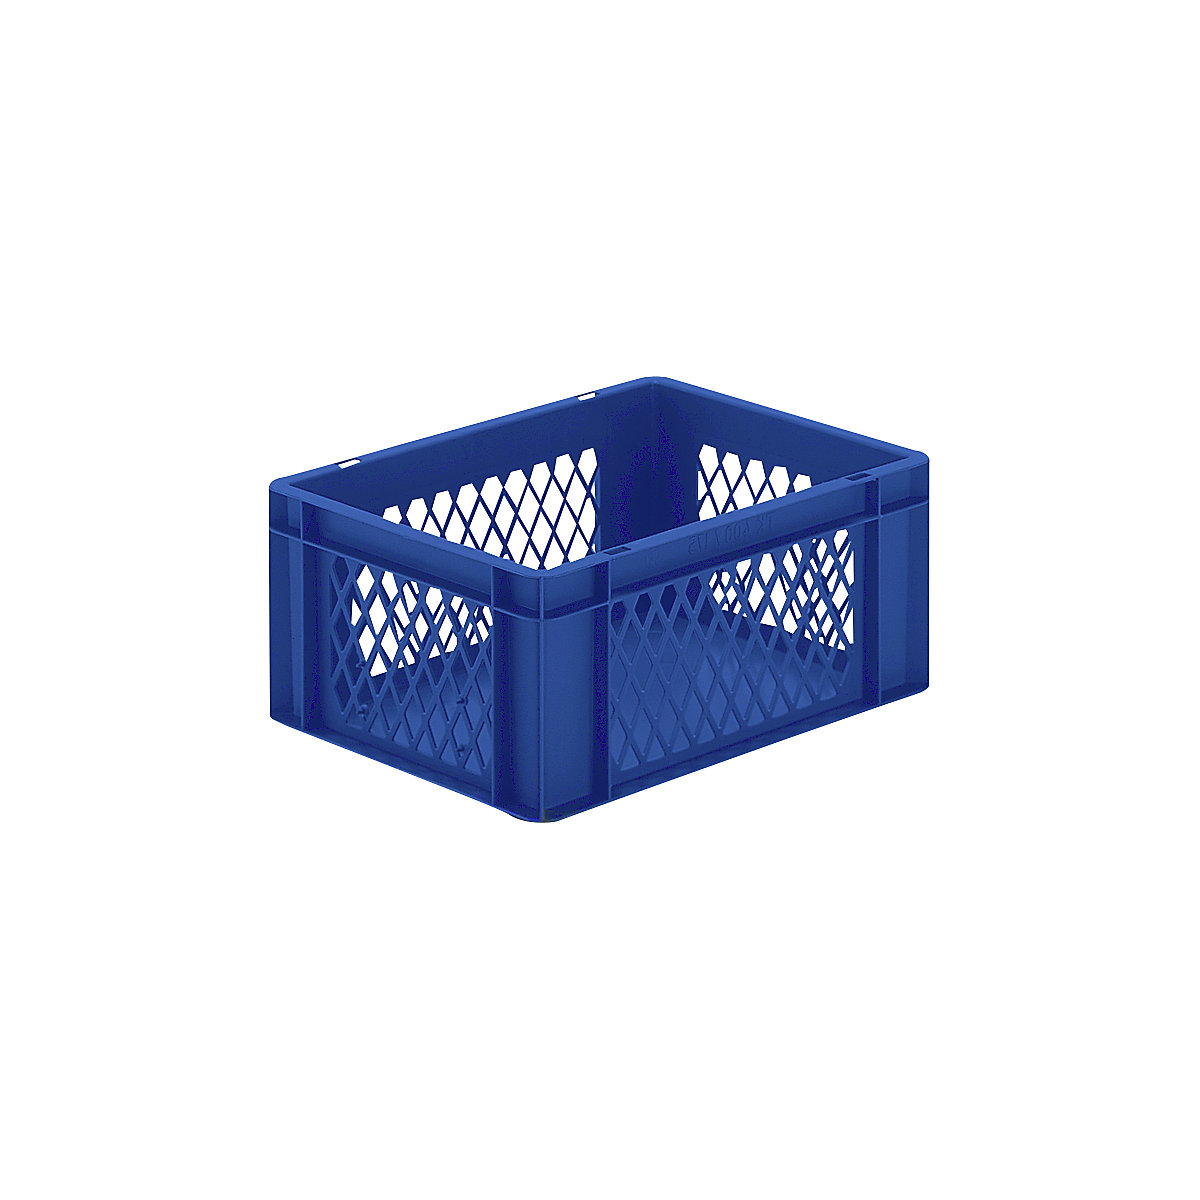 Euro stacking container, perforated walls, closed base, LxWxH 400 x 300 x 175 mm, blue, pack of 5-7